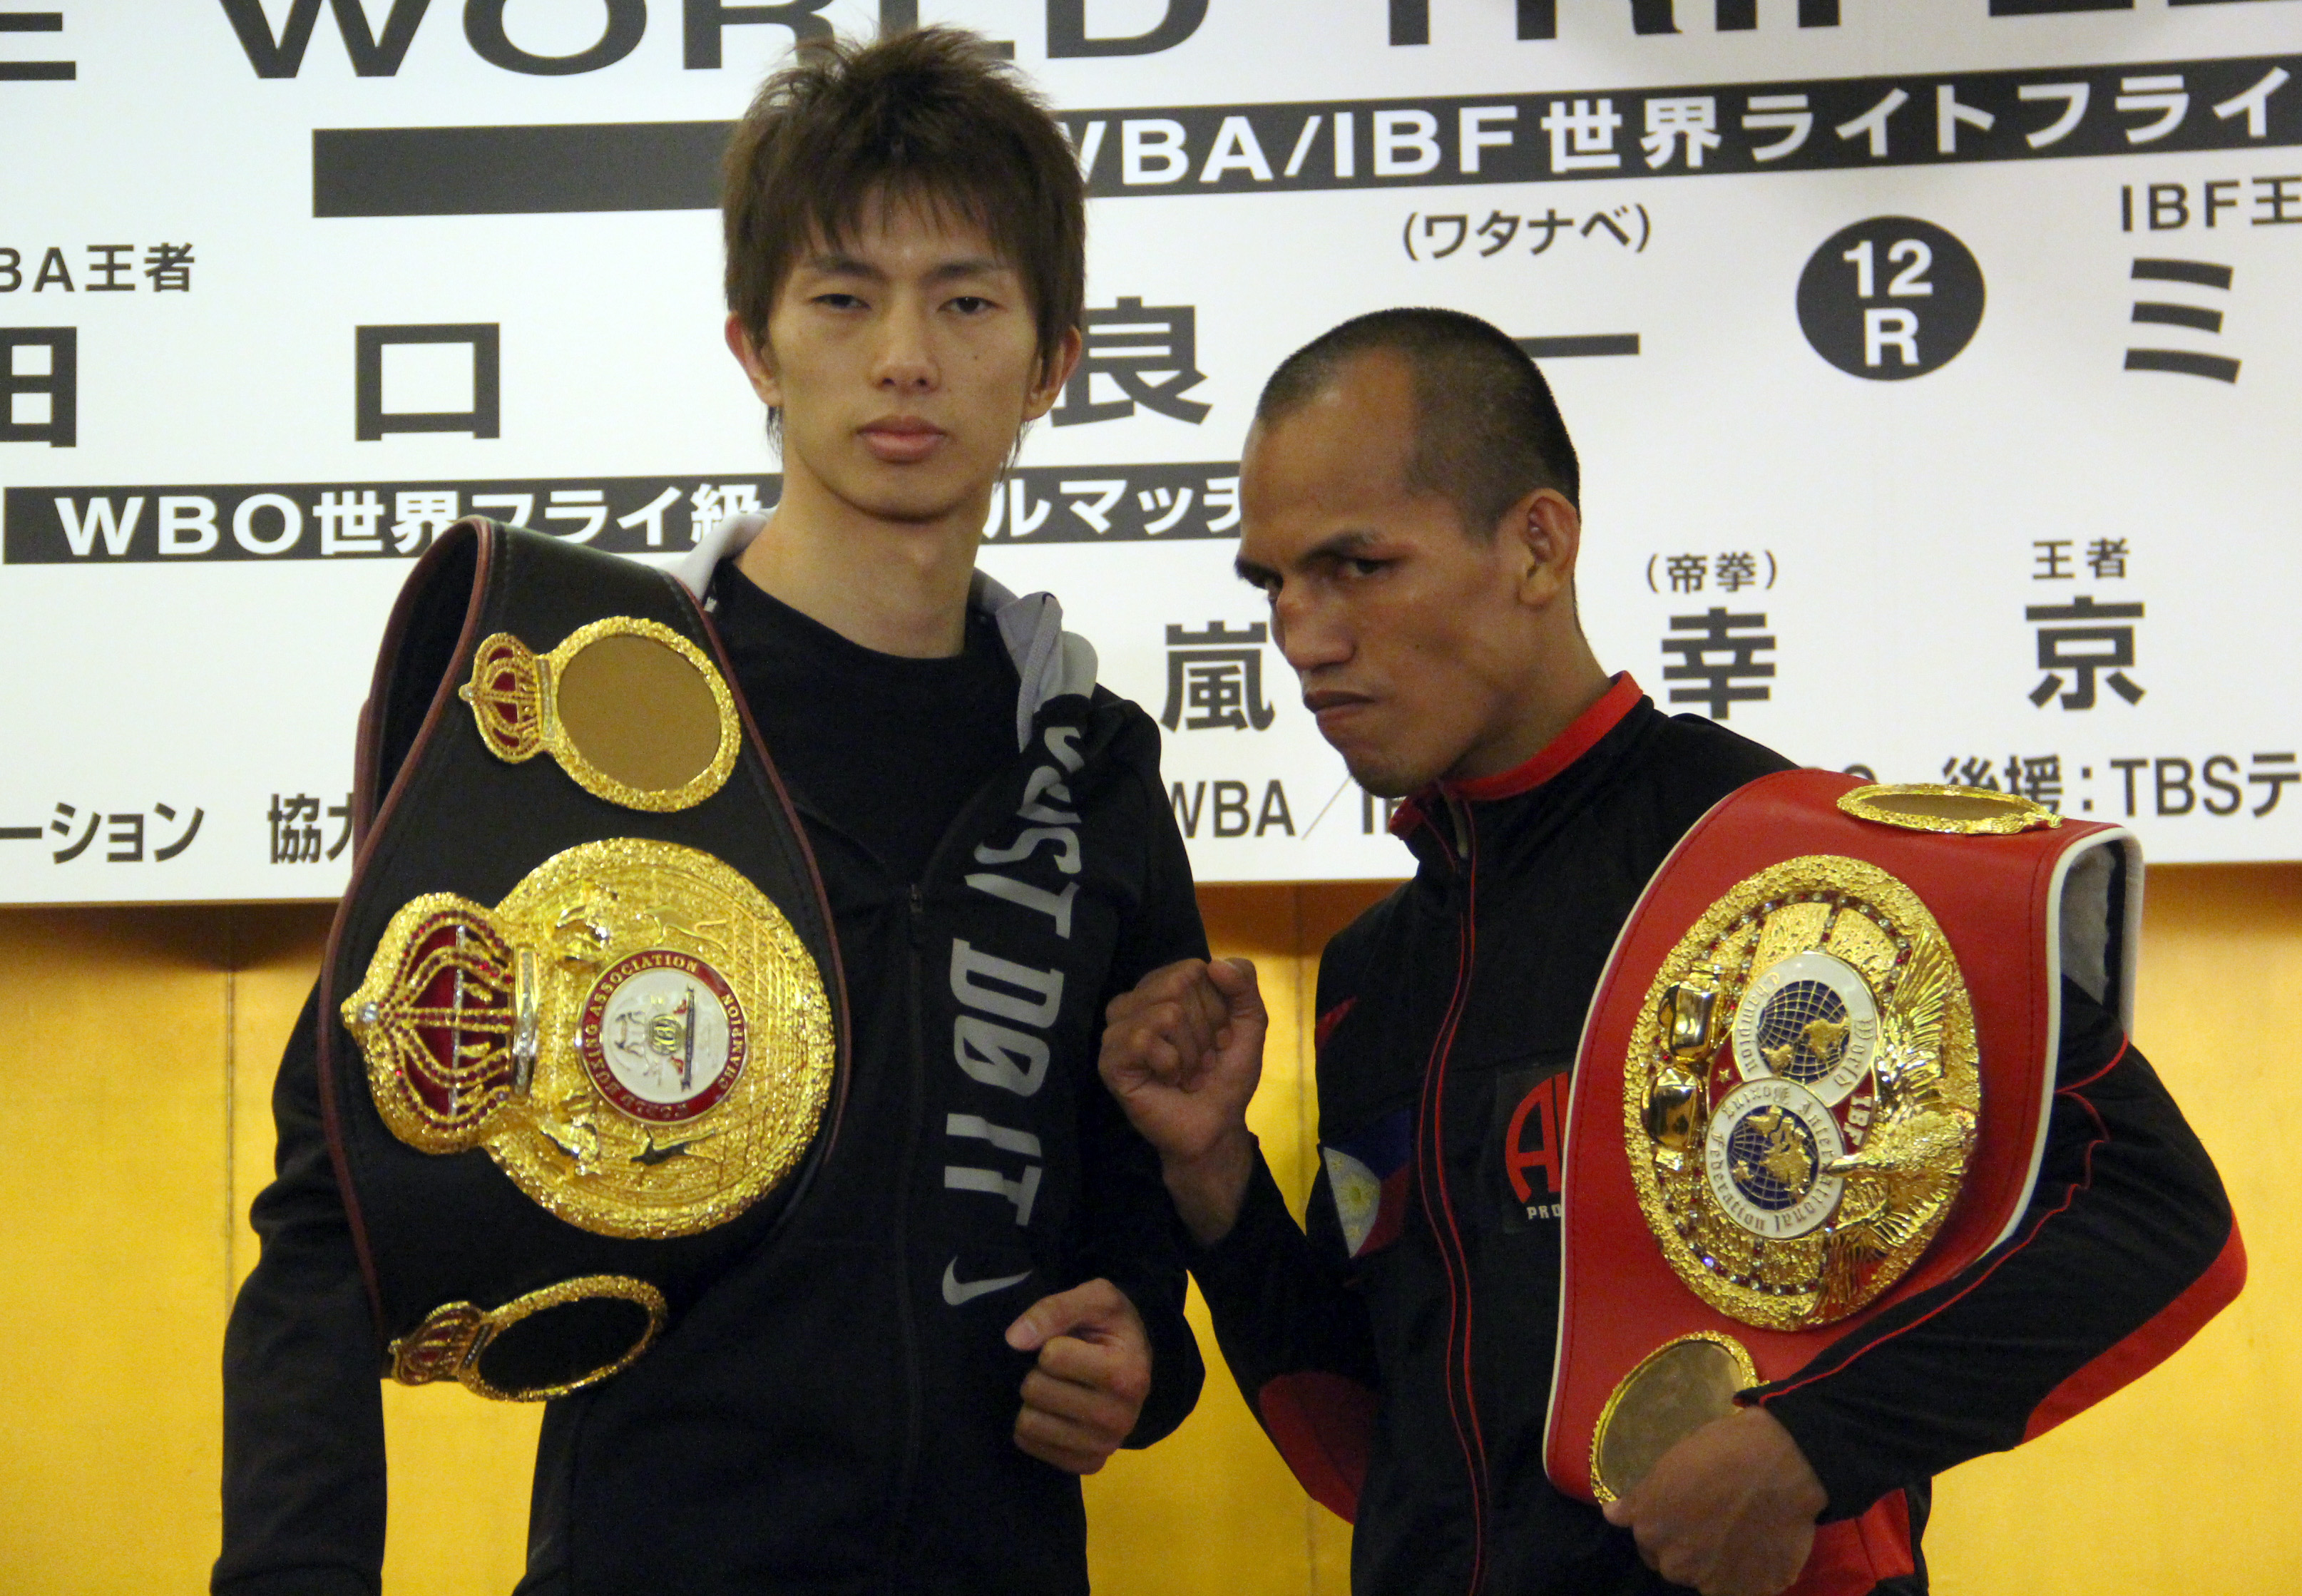 Taguchi and Melindo make weight for their year-end fight